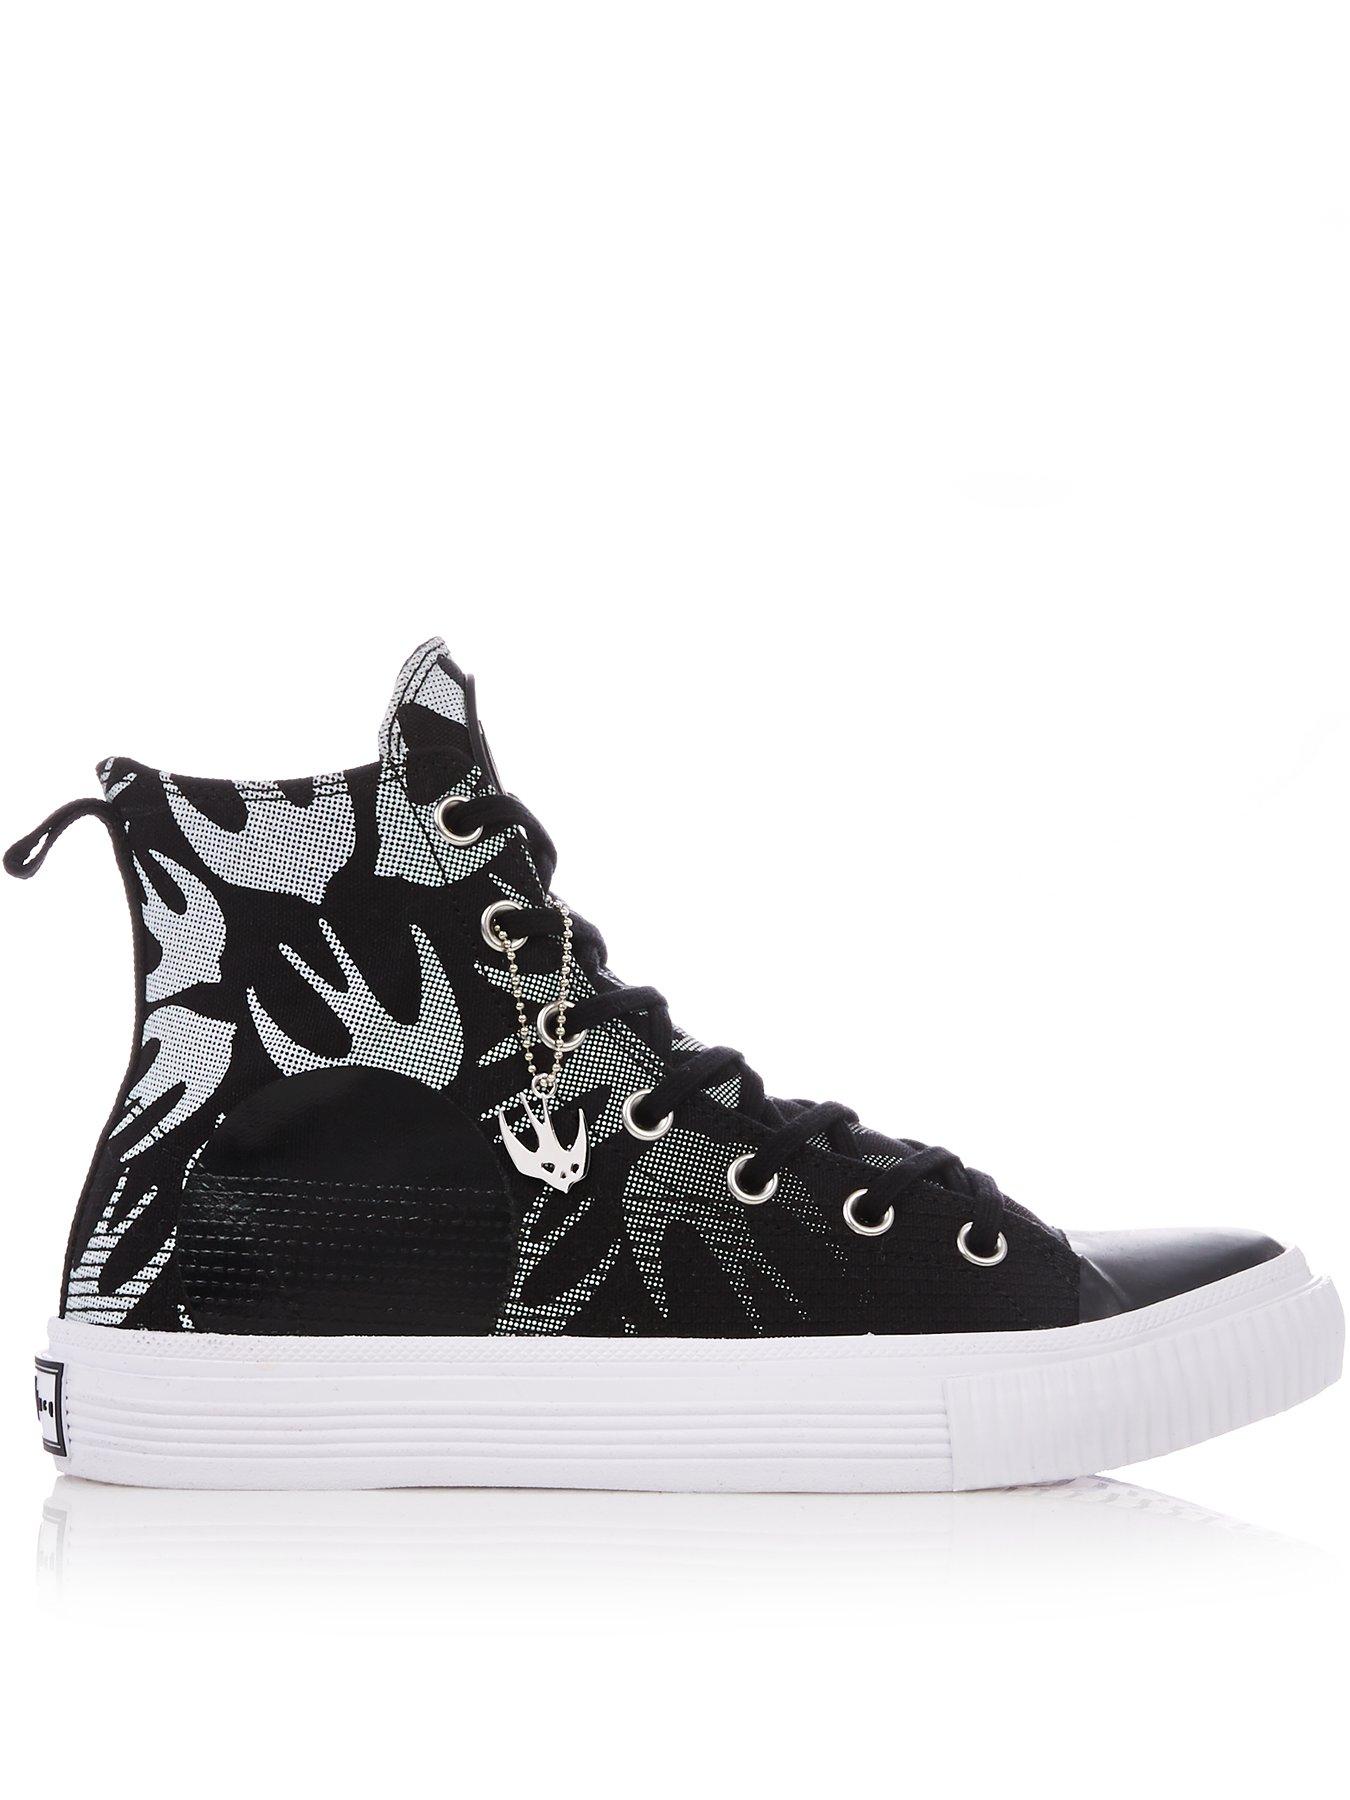 alexander mcqueen trainers pay monthly